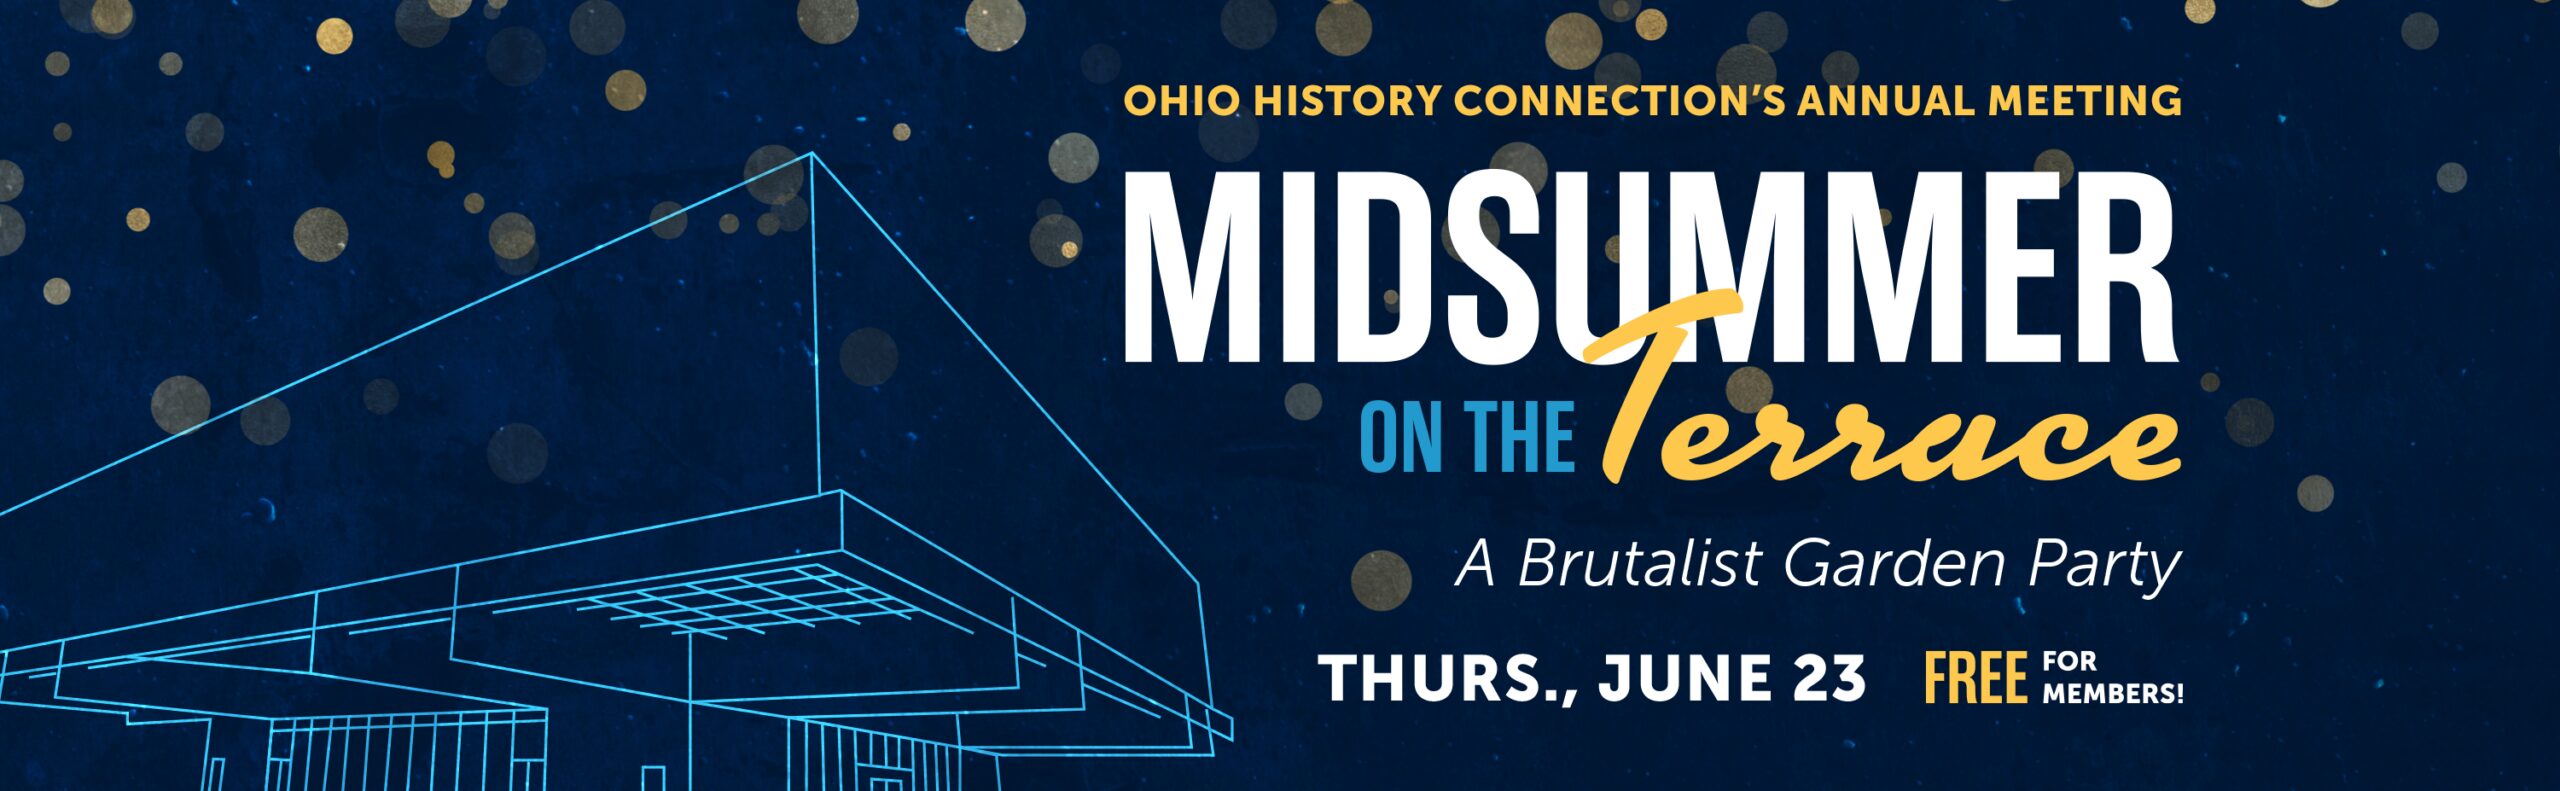 Annual Meeting: Midsummer on the Terrace, A brutalist garden party. Thursday, June 23, 2022. 4:30 p.m. to 7 p.m. Free to members.